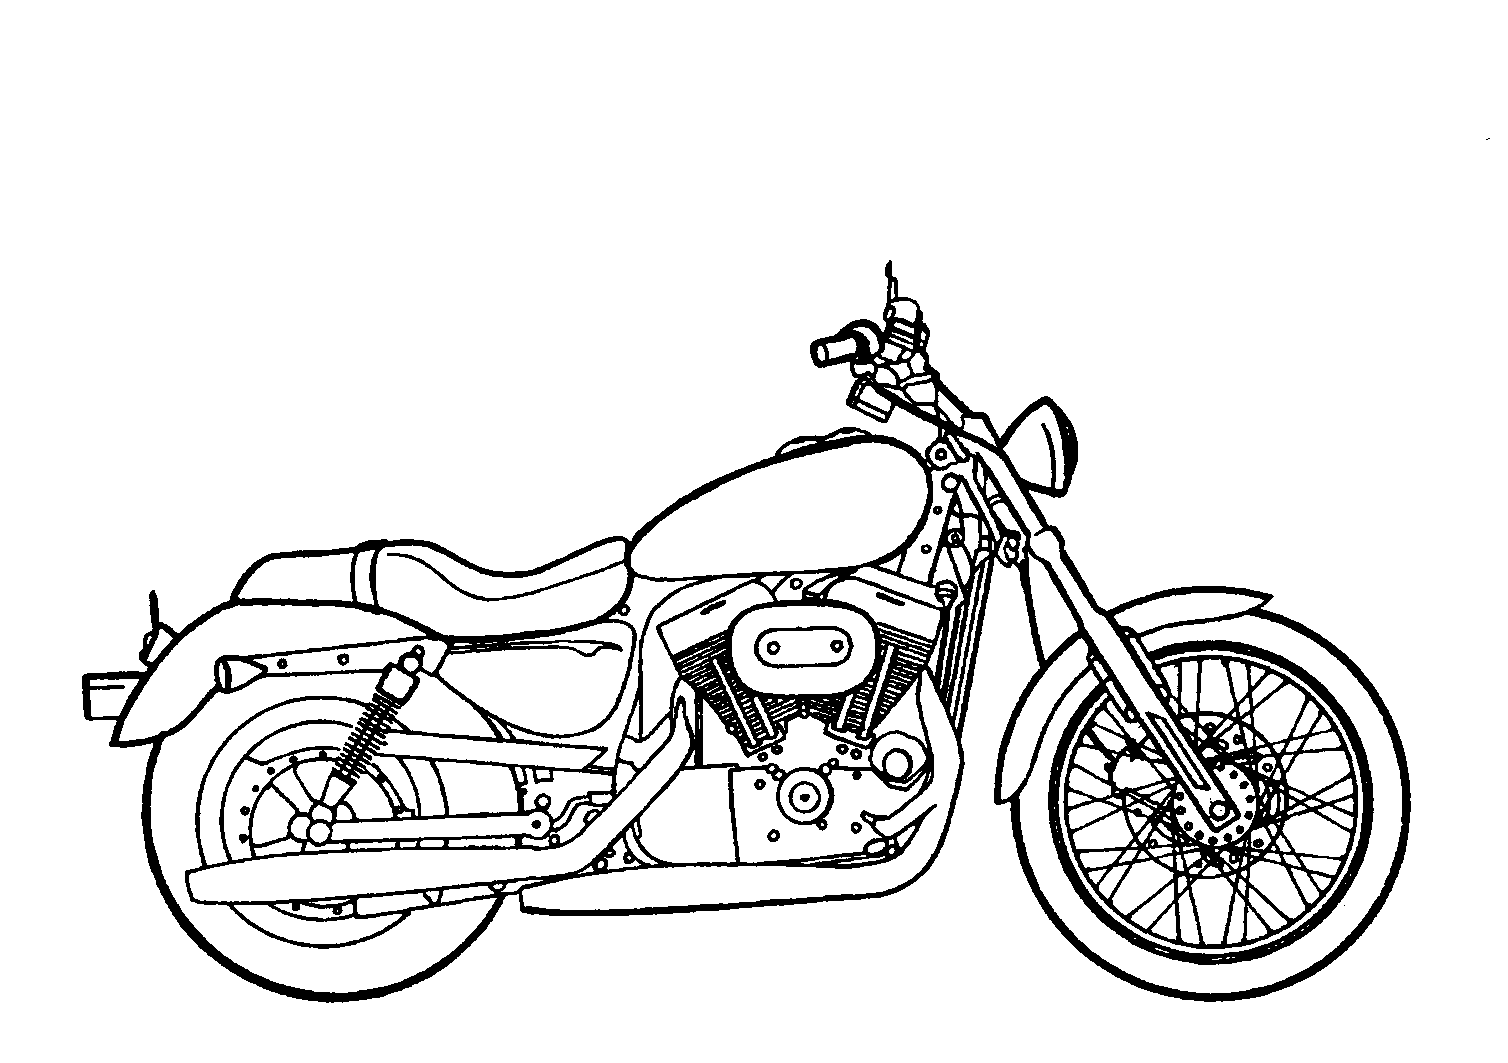 Motorcycle  black and white harley motorcycle clipart black and white free